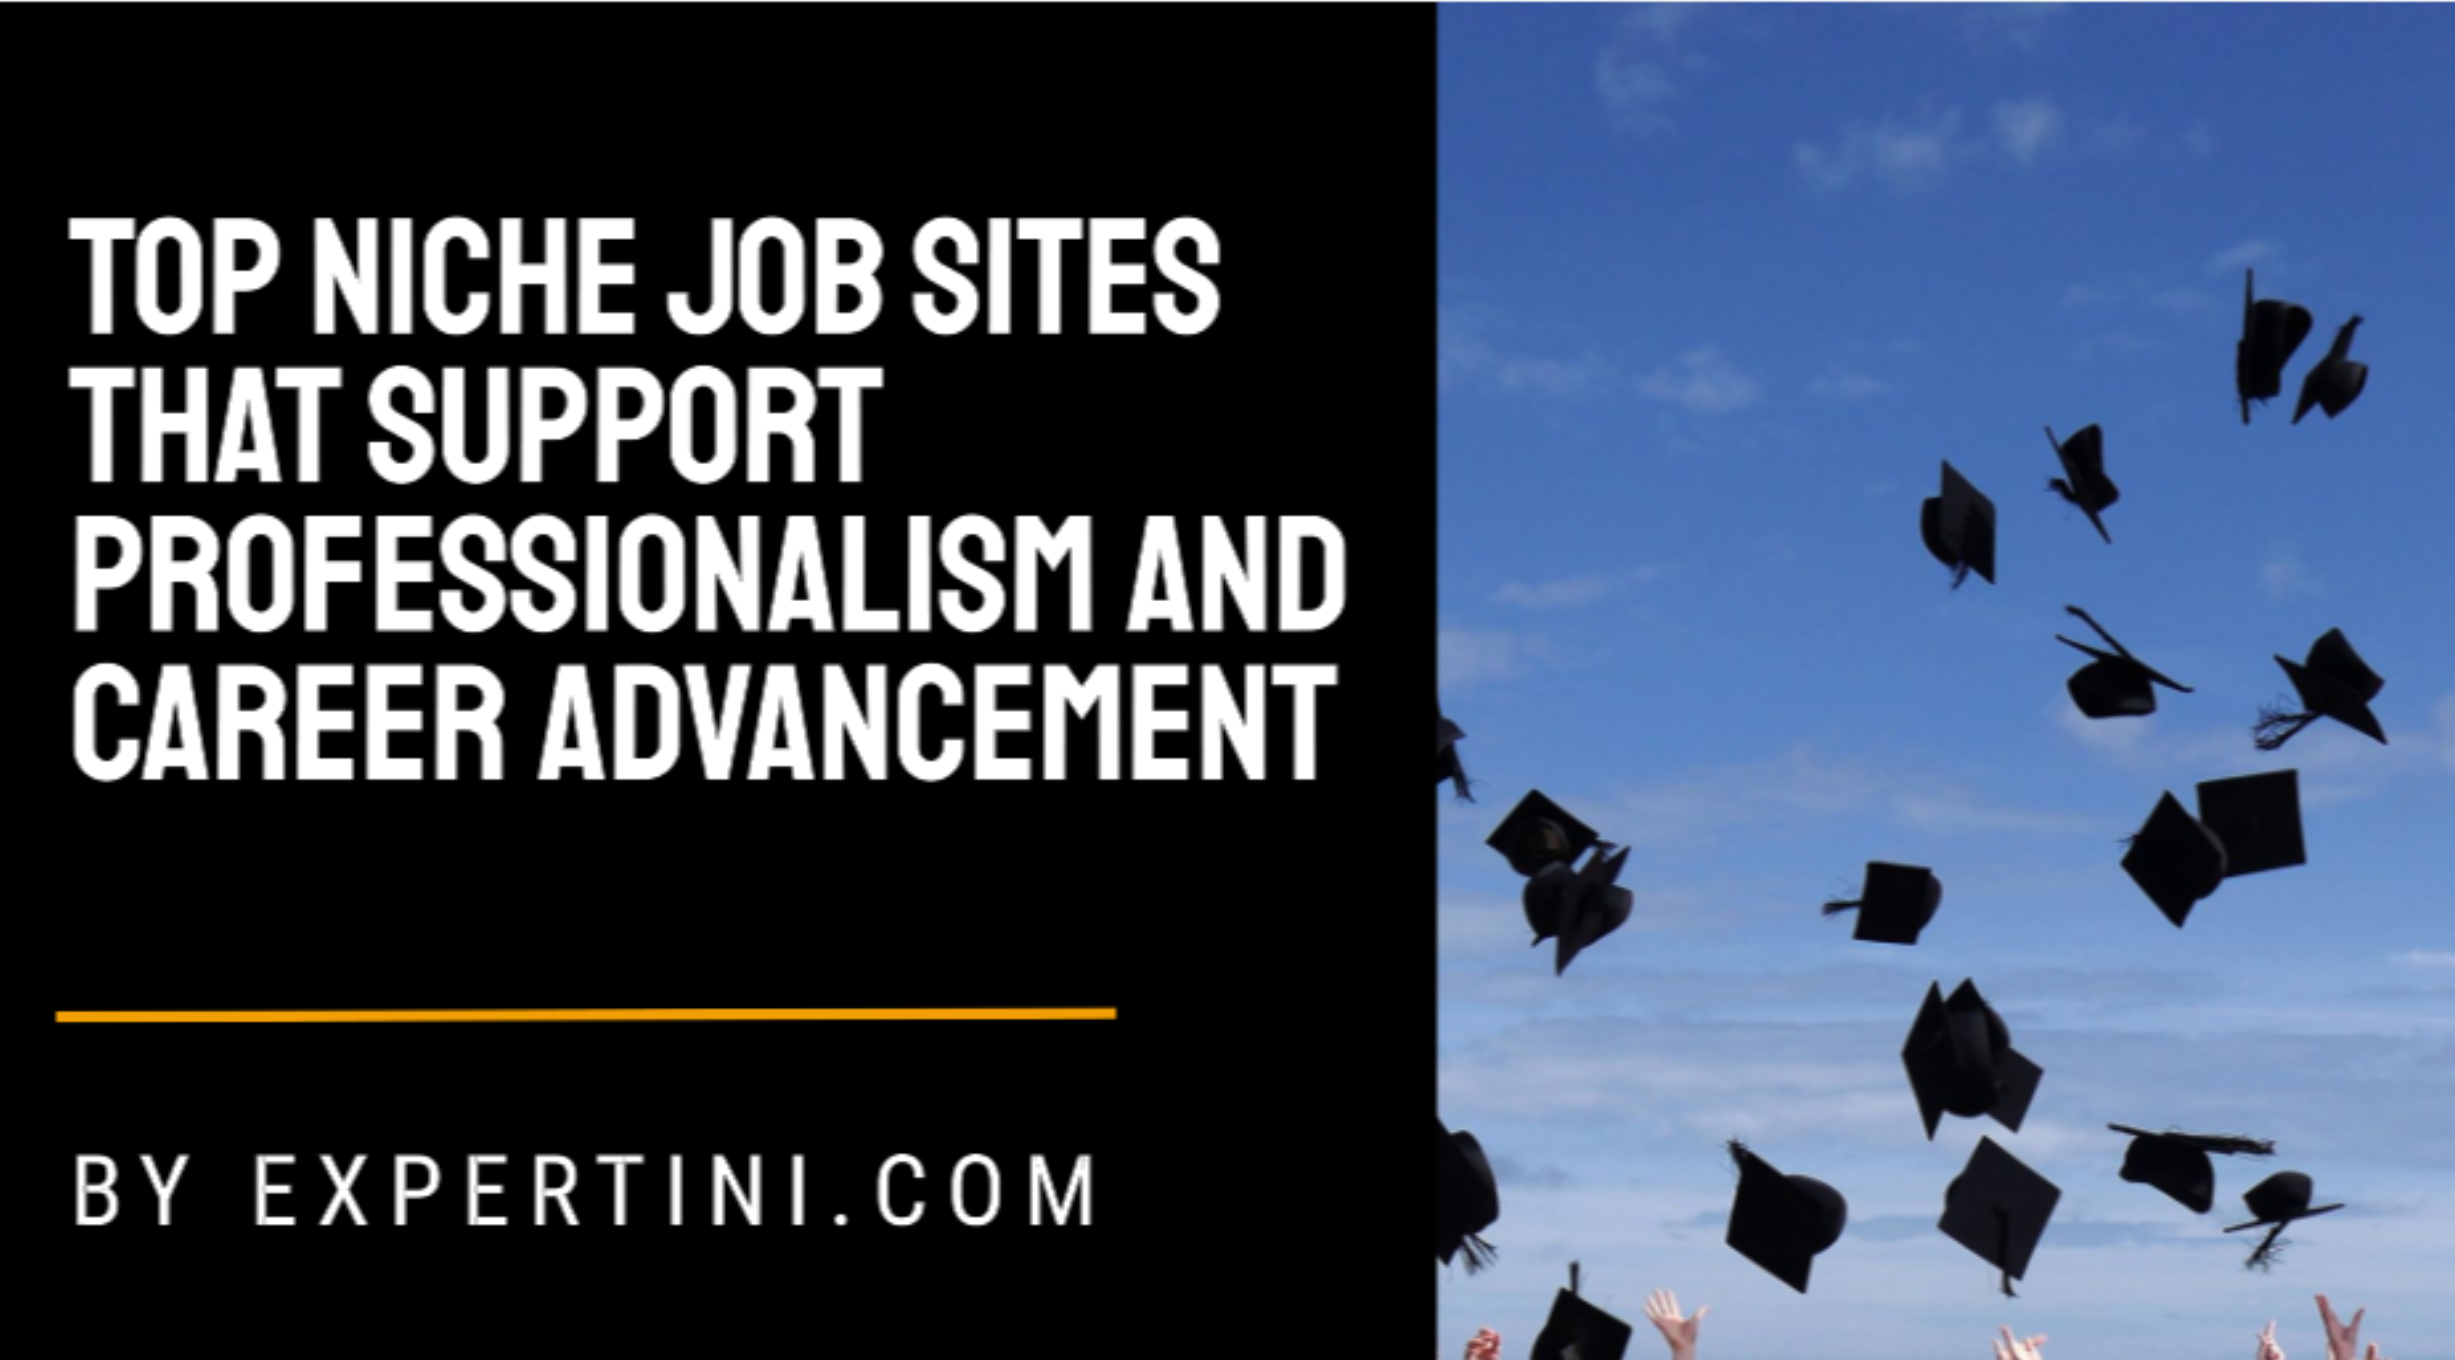 275 Top Niche Job Sites That Support Professionalism and Career Advancement for South Africa